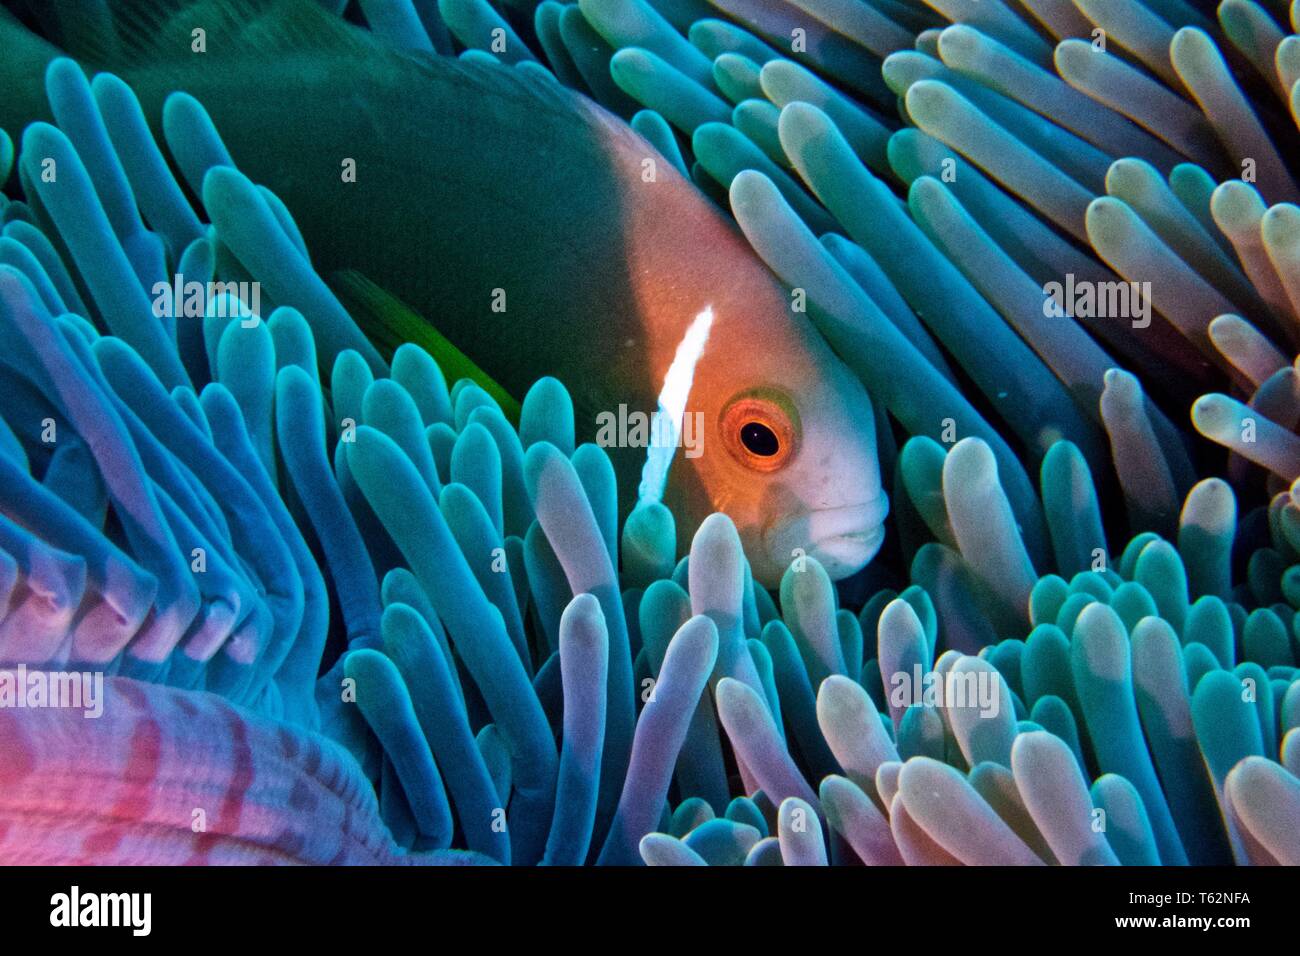 Magnificent sea anemone, Heteractis magnifica with Maldives anemonefish, or blackfooted clownfish, Amphiprion nigripes Stock Photo